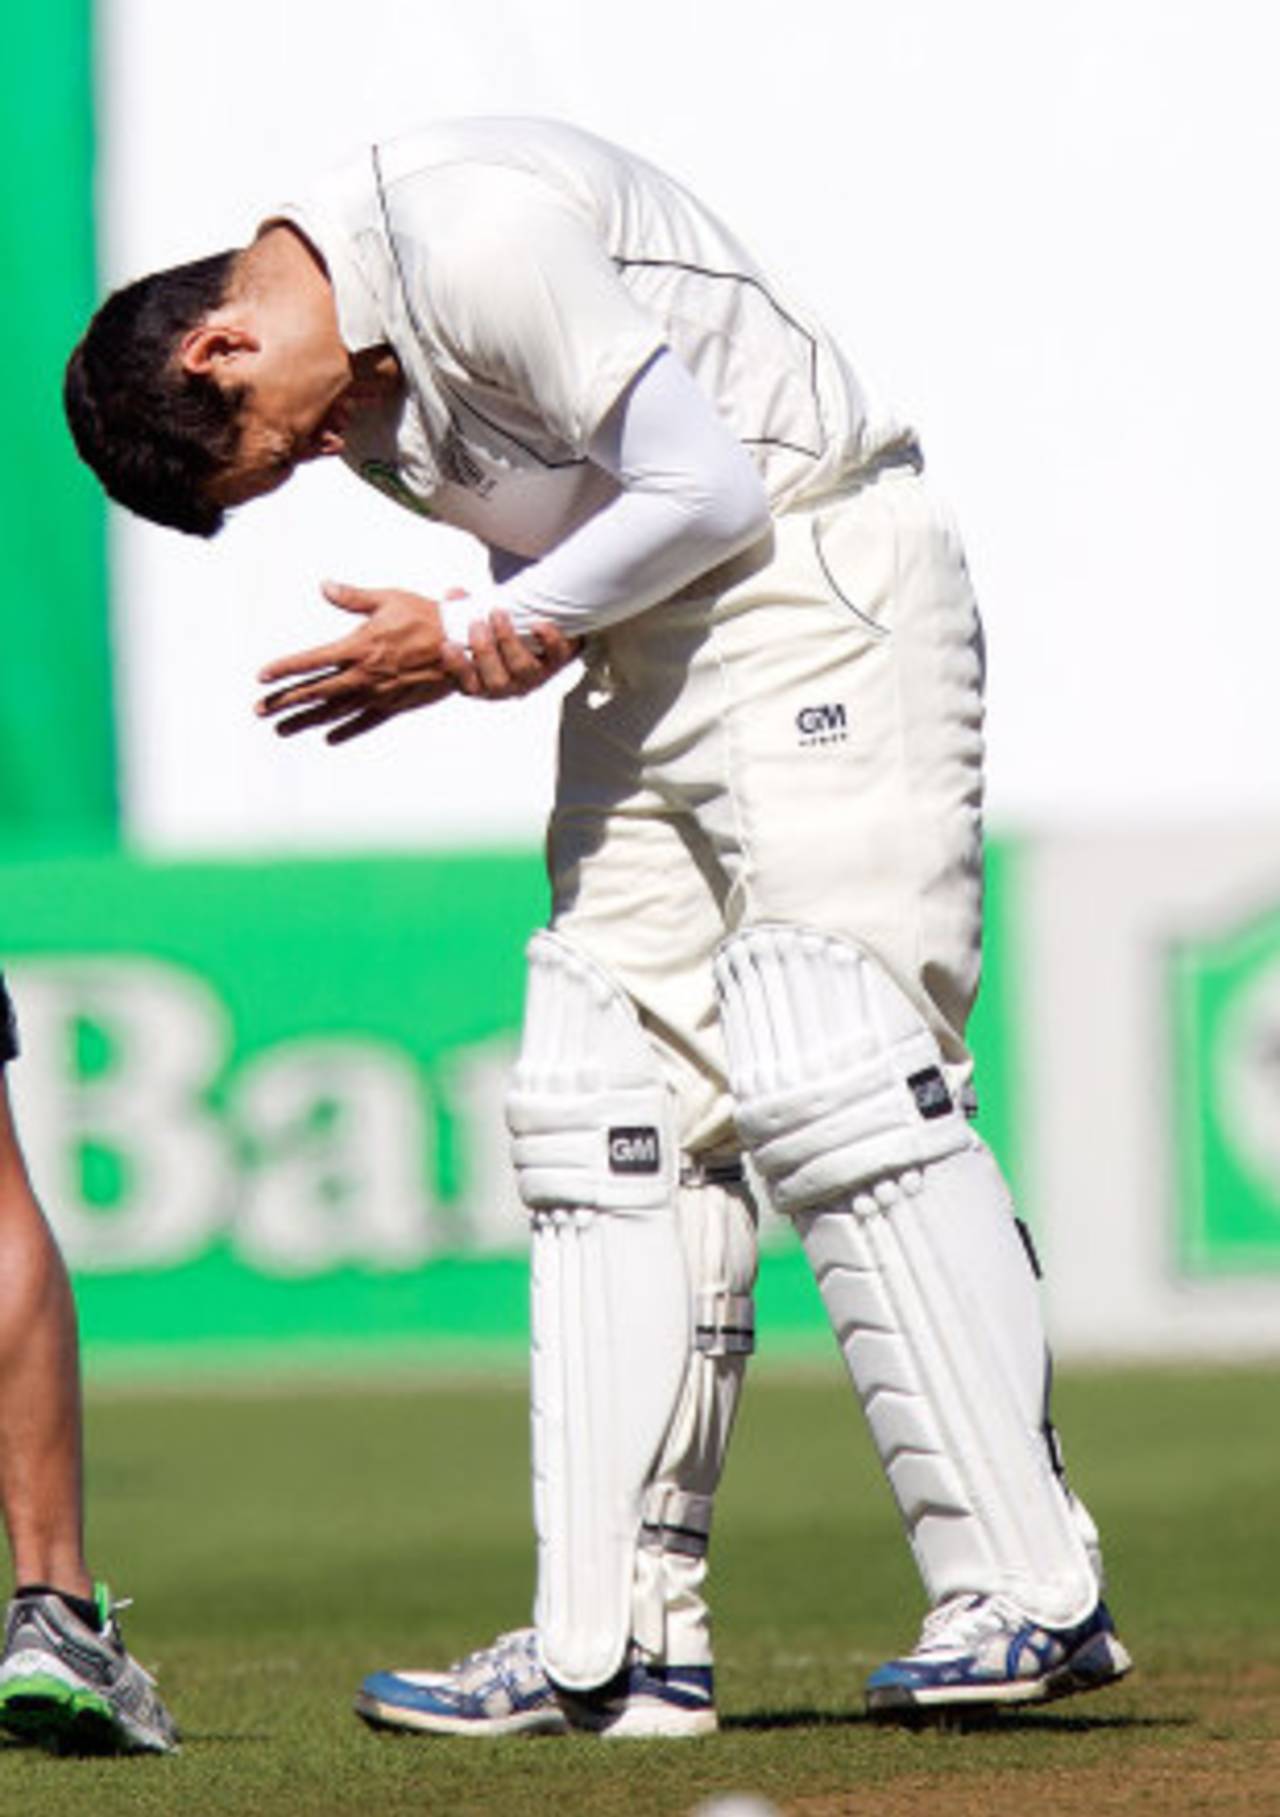 Ross Taylor winces in pain after being struck on the wrist, New Zealand v South Africa, 3rd Test, Wellington, 4th day, March 26, 2012